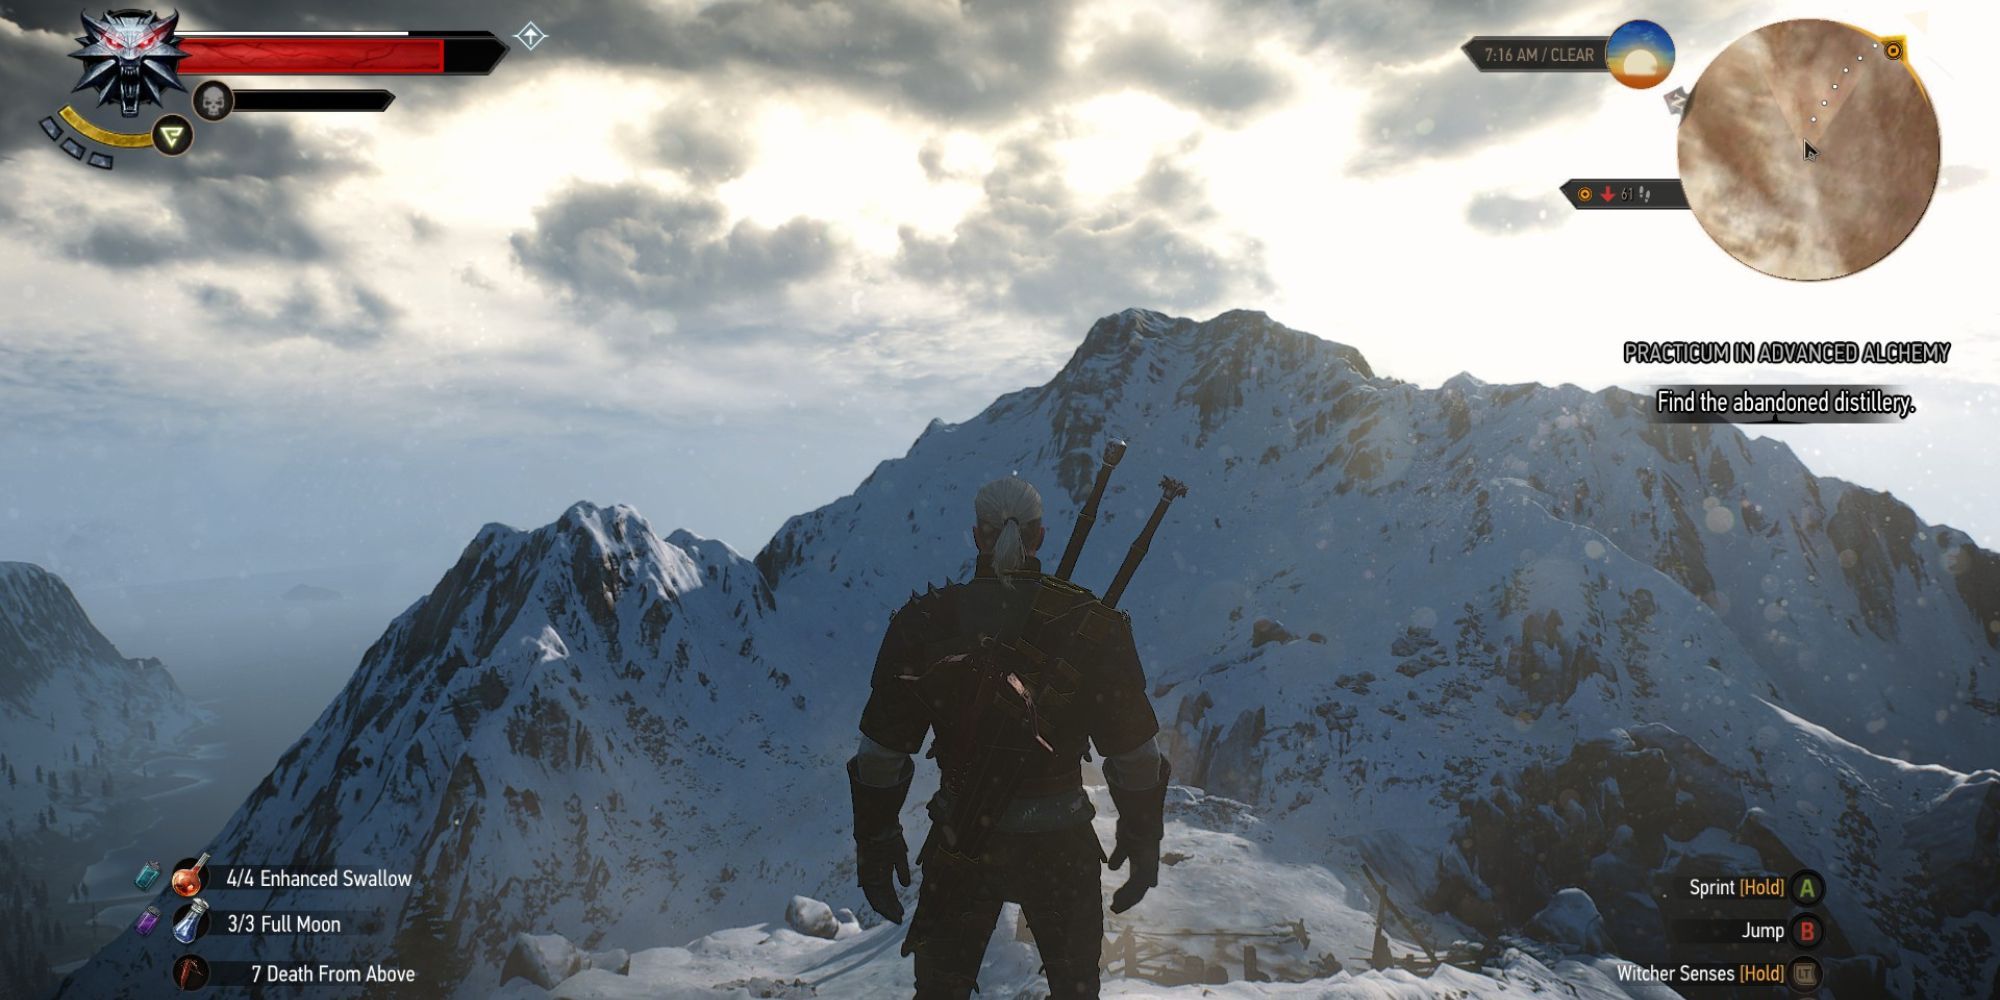 The Witcher 3 - Geralt stands overlooking a snowy mountain